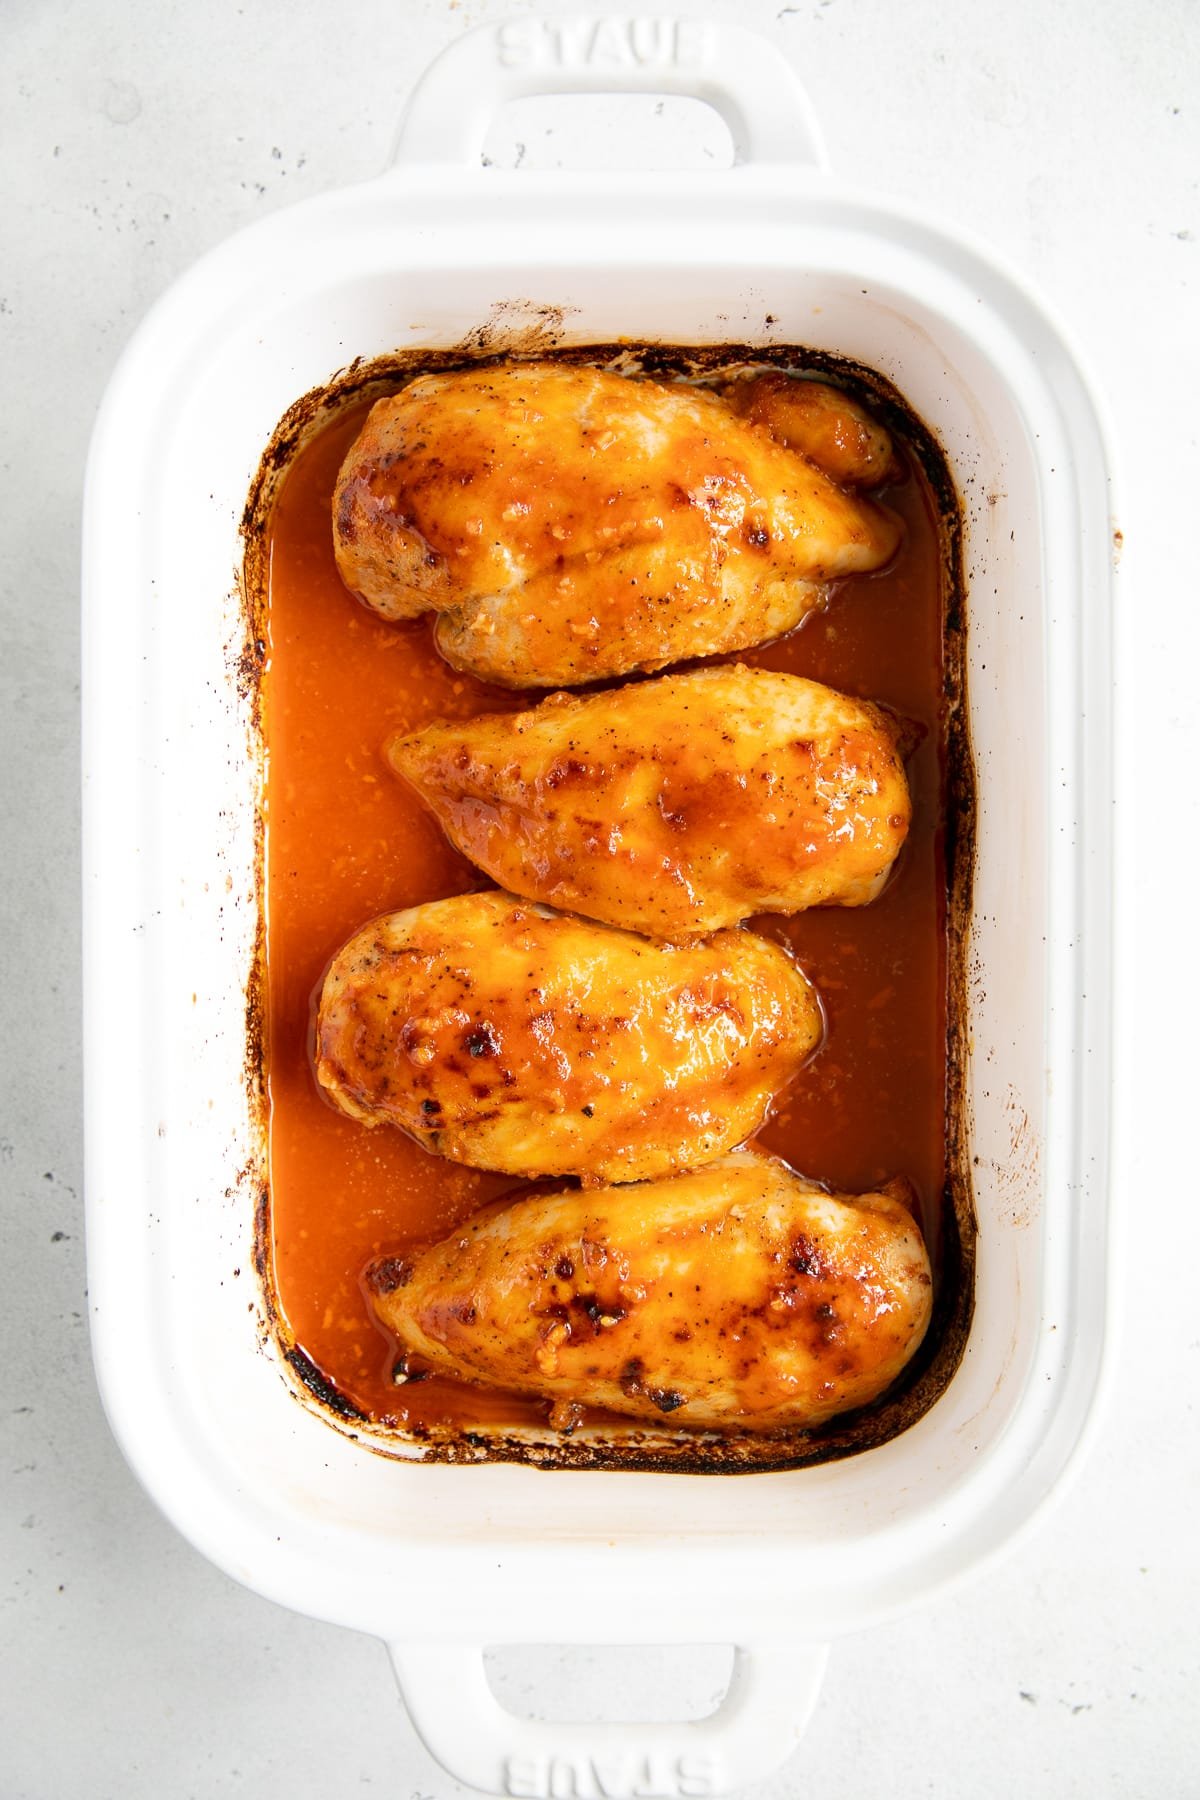 Easy Baked Buffalo Chicken Recipe The Forked Spoon,How To Grow Sweet Potatoes From Tubers